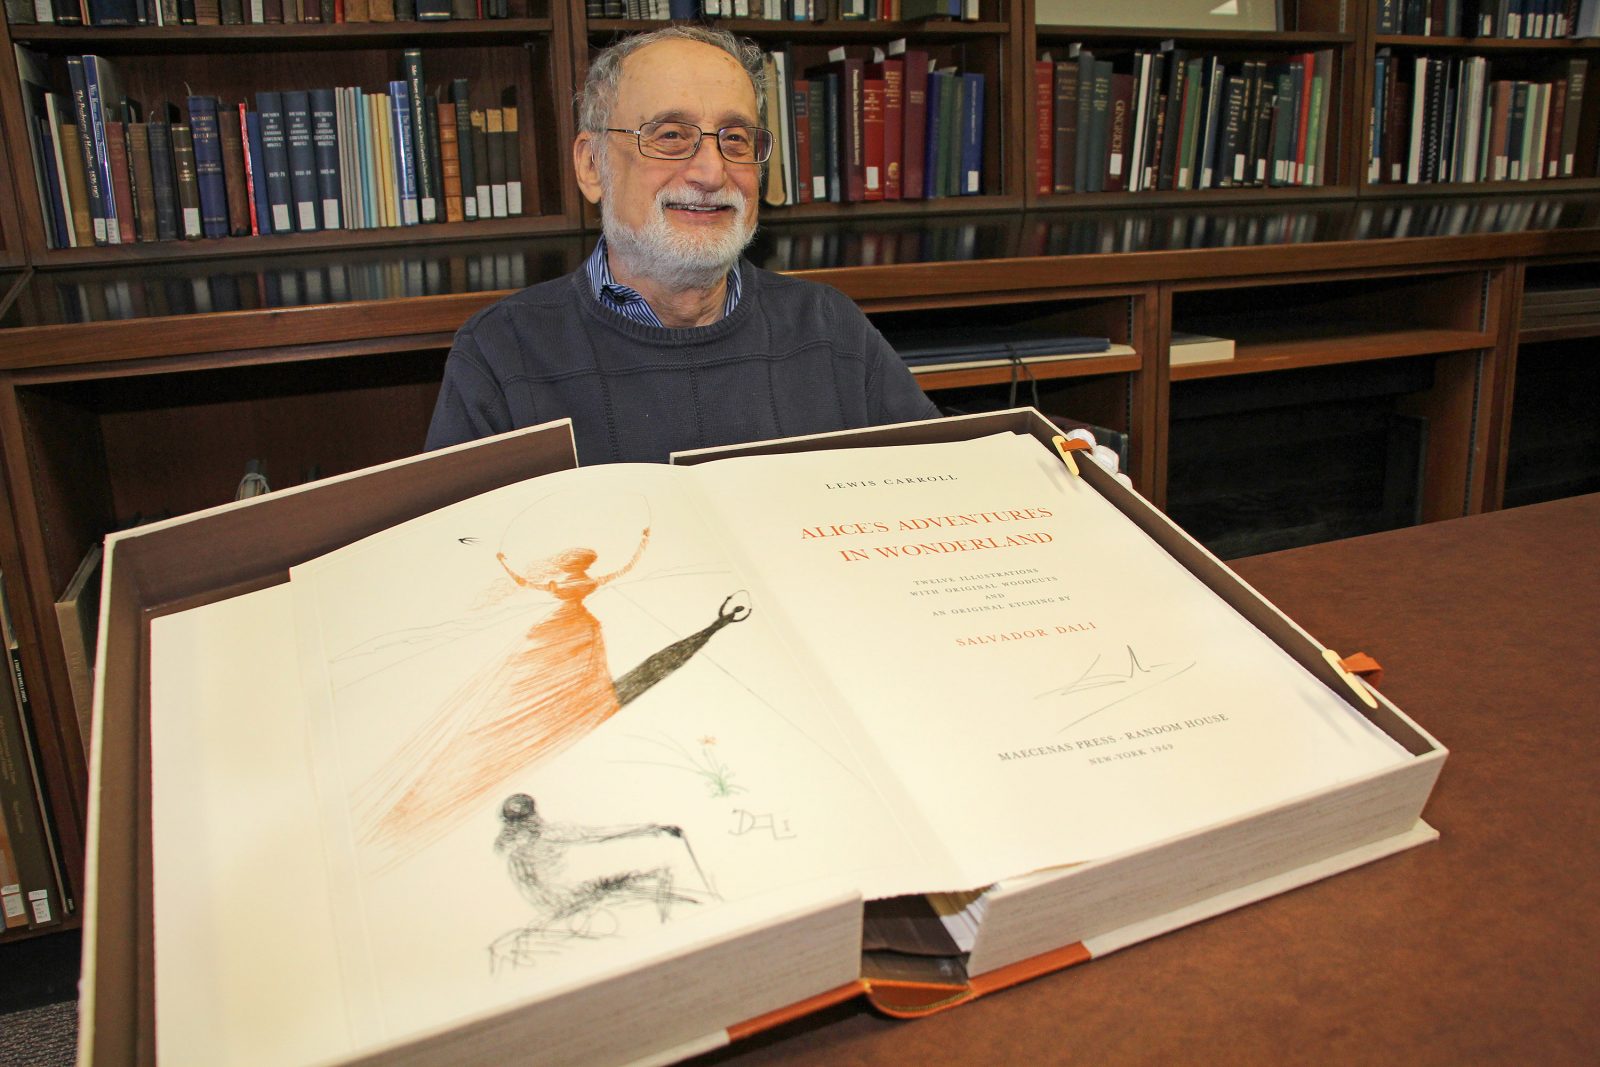 Stuart Rothstein, a retired Brock chemistry and physics professor, donated a rare version of Alice's Adventures in Wonderland, illustrated by Salvador Dali, to Brock University's Special Collections in 2017. Image: Brock University